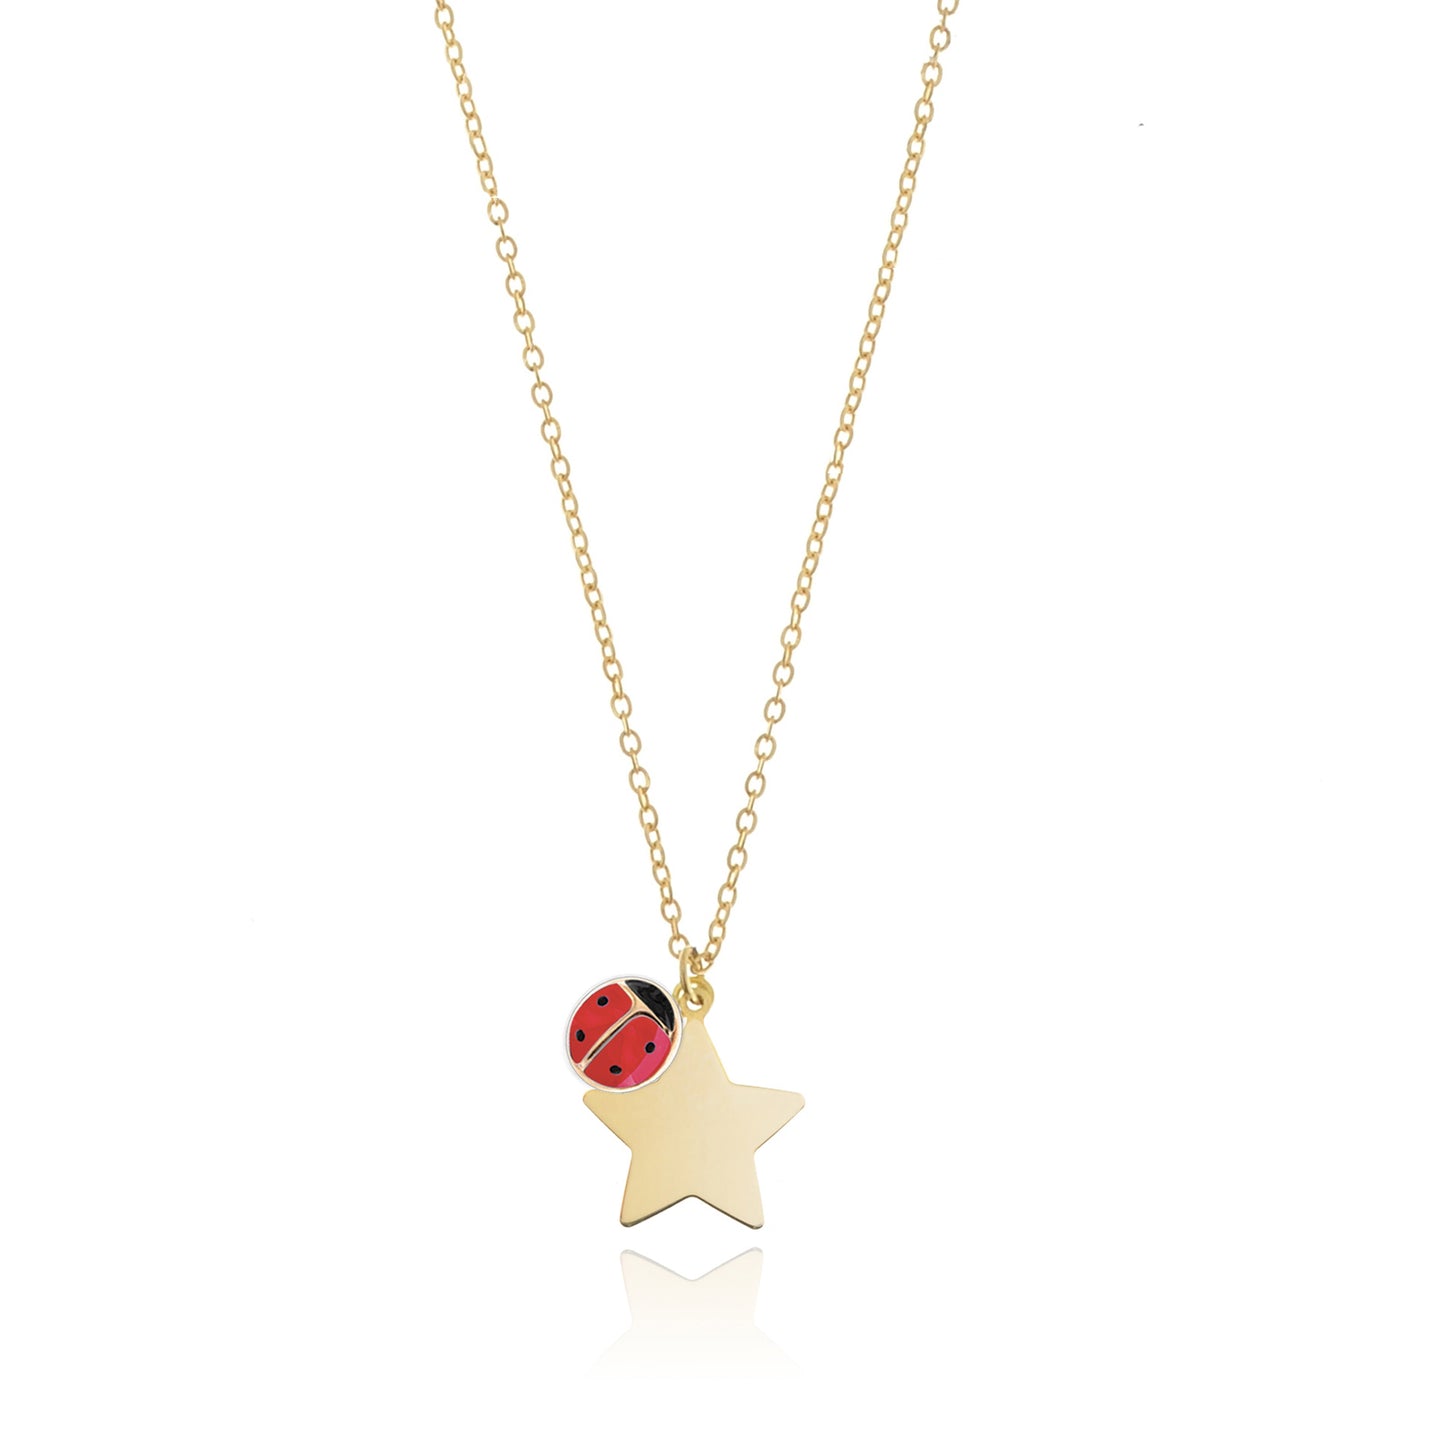 Ladybug Star Necklace in Real Gold